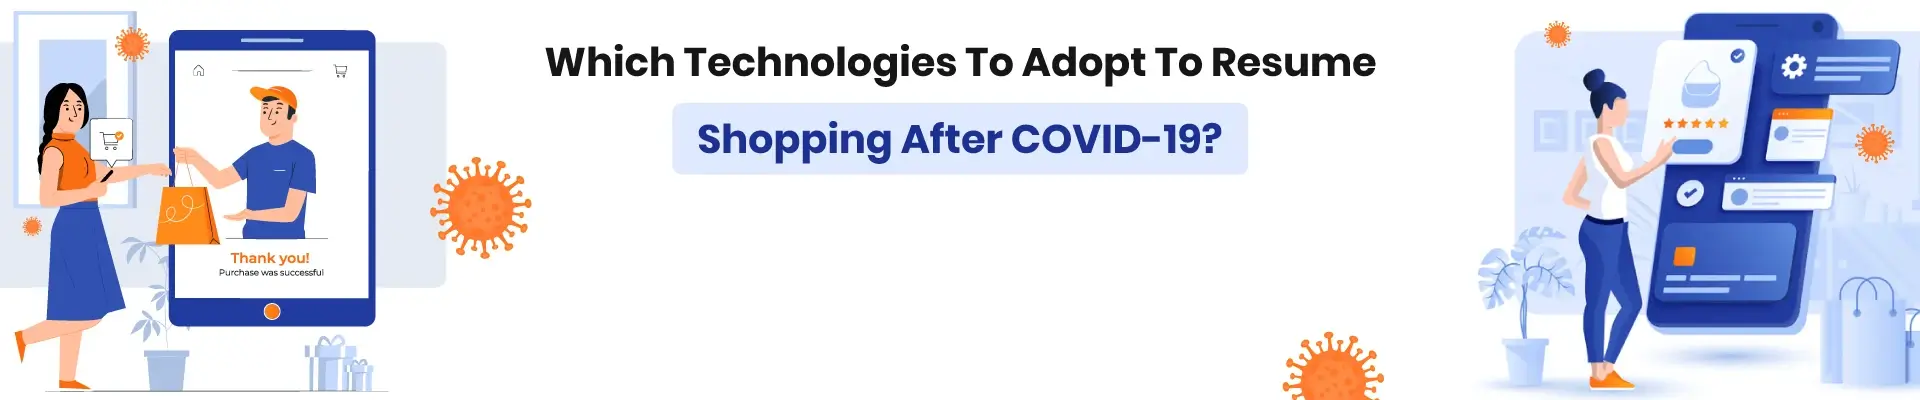 Technologies To Adopt In The Retail Industry After COVID-19